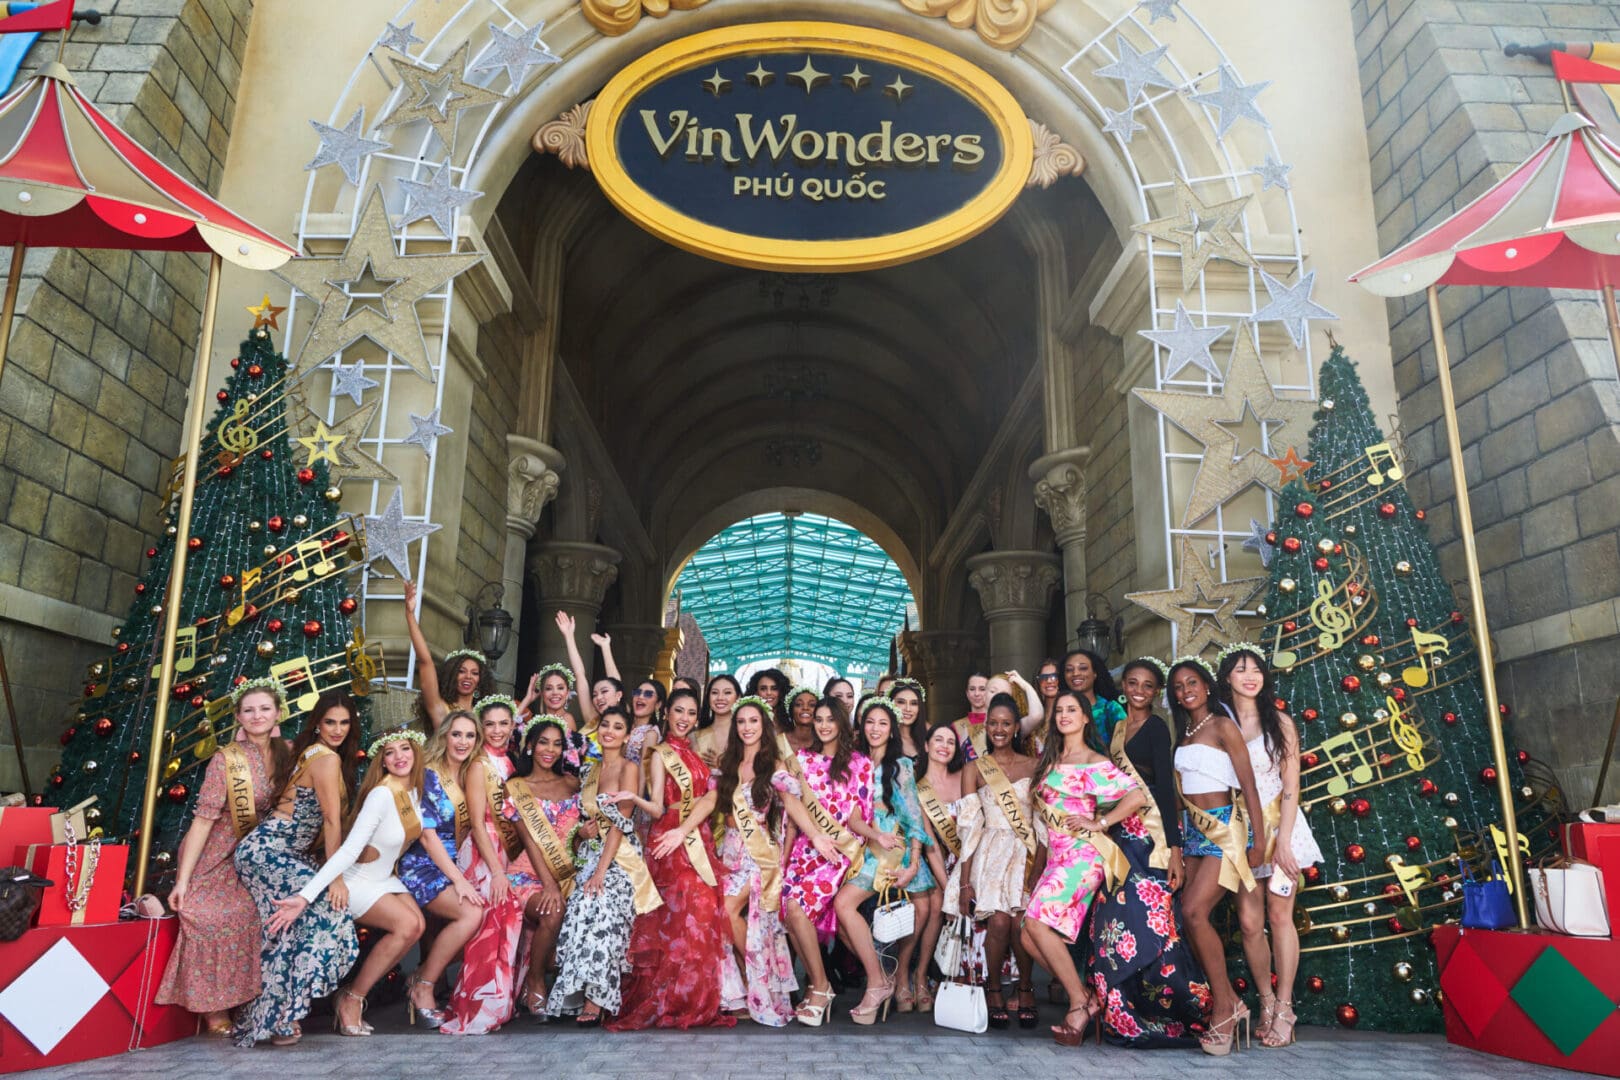 Group of women in diverse formal attire posing in front of vinwonders phu quoc entrance decorated for christmas.